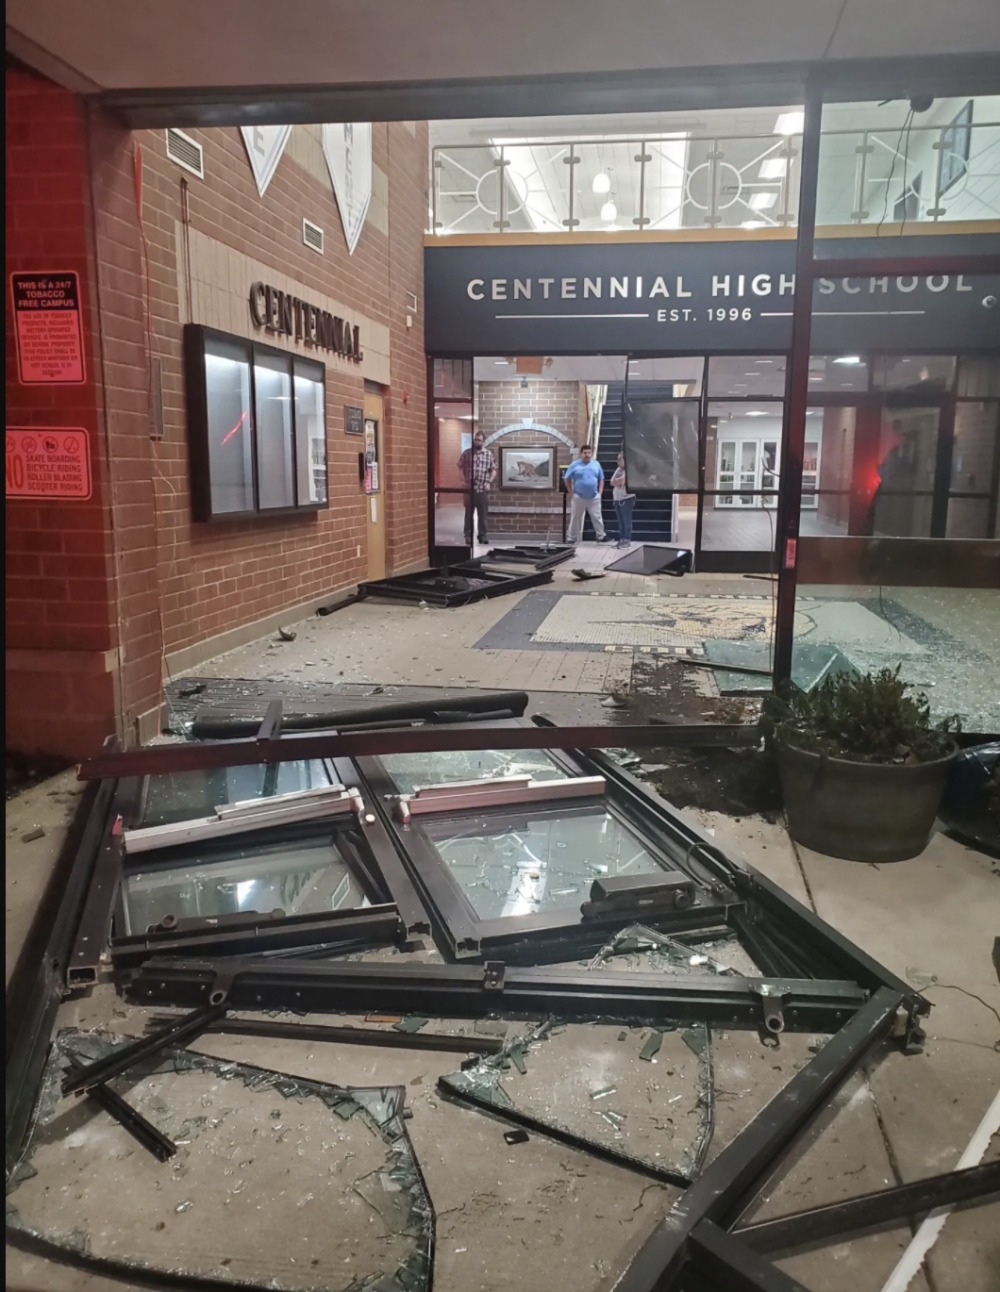 A Williamson County School District student was arrested after allegedly plowing his vehicle into the front of Centennial High School in Franklin the night of Jan. 13, causing damage to the entryway. (Courtesy Franklin Police Department)